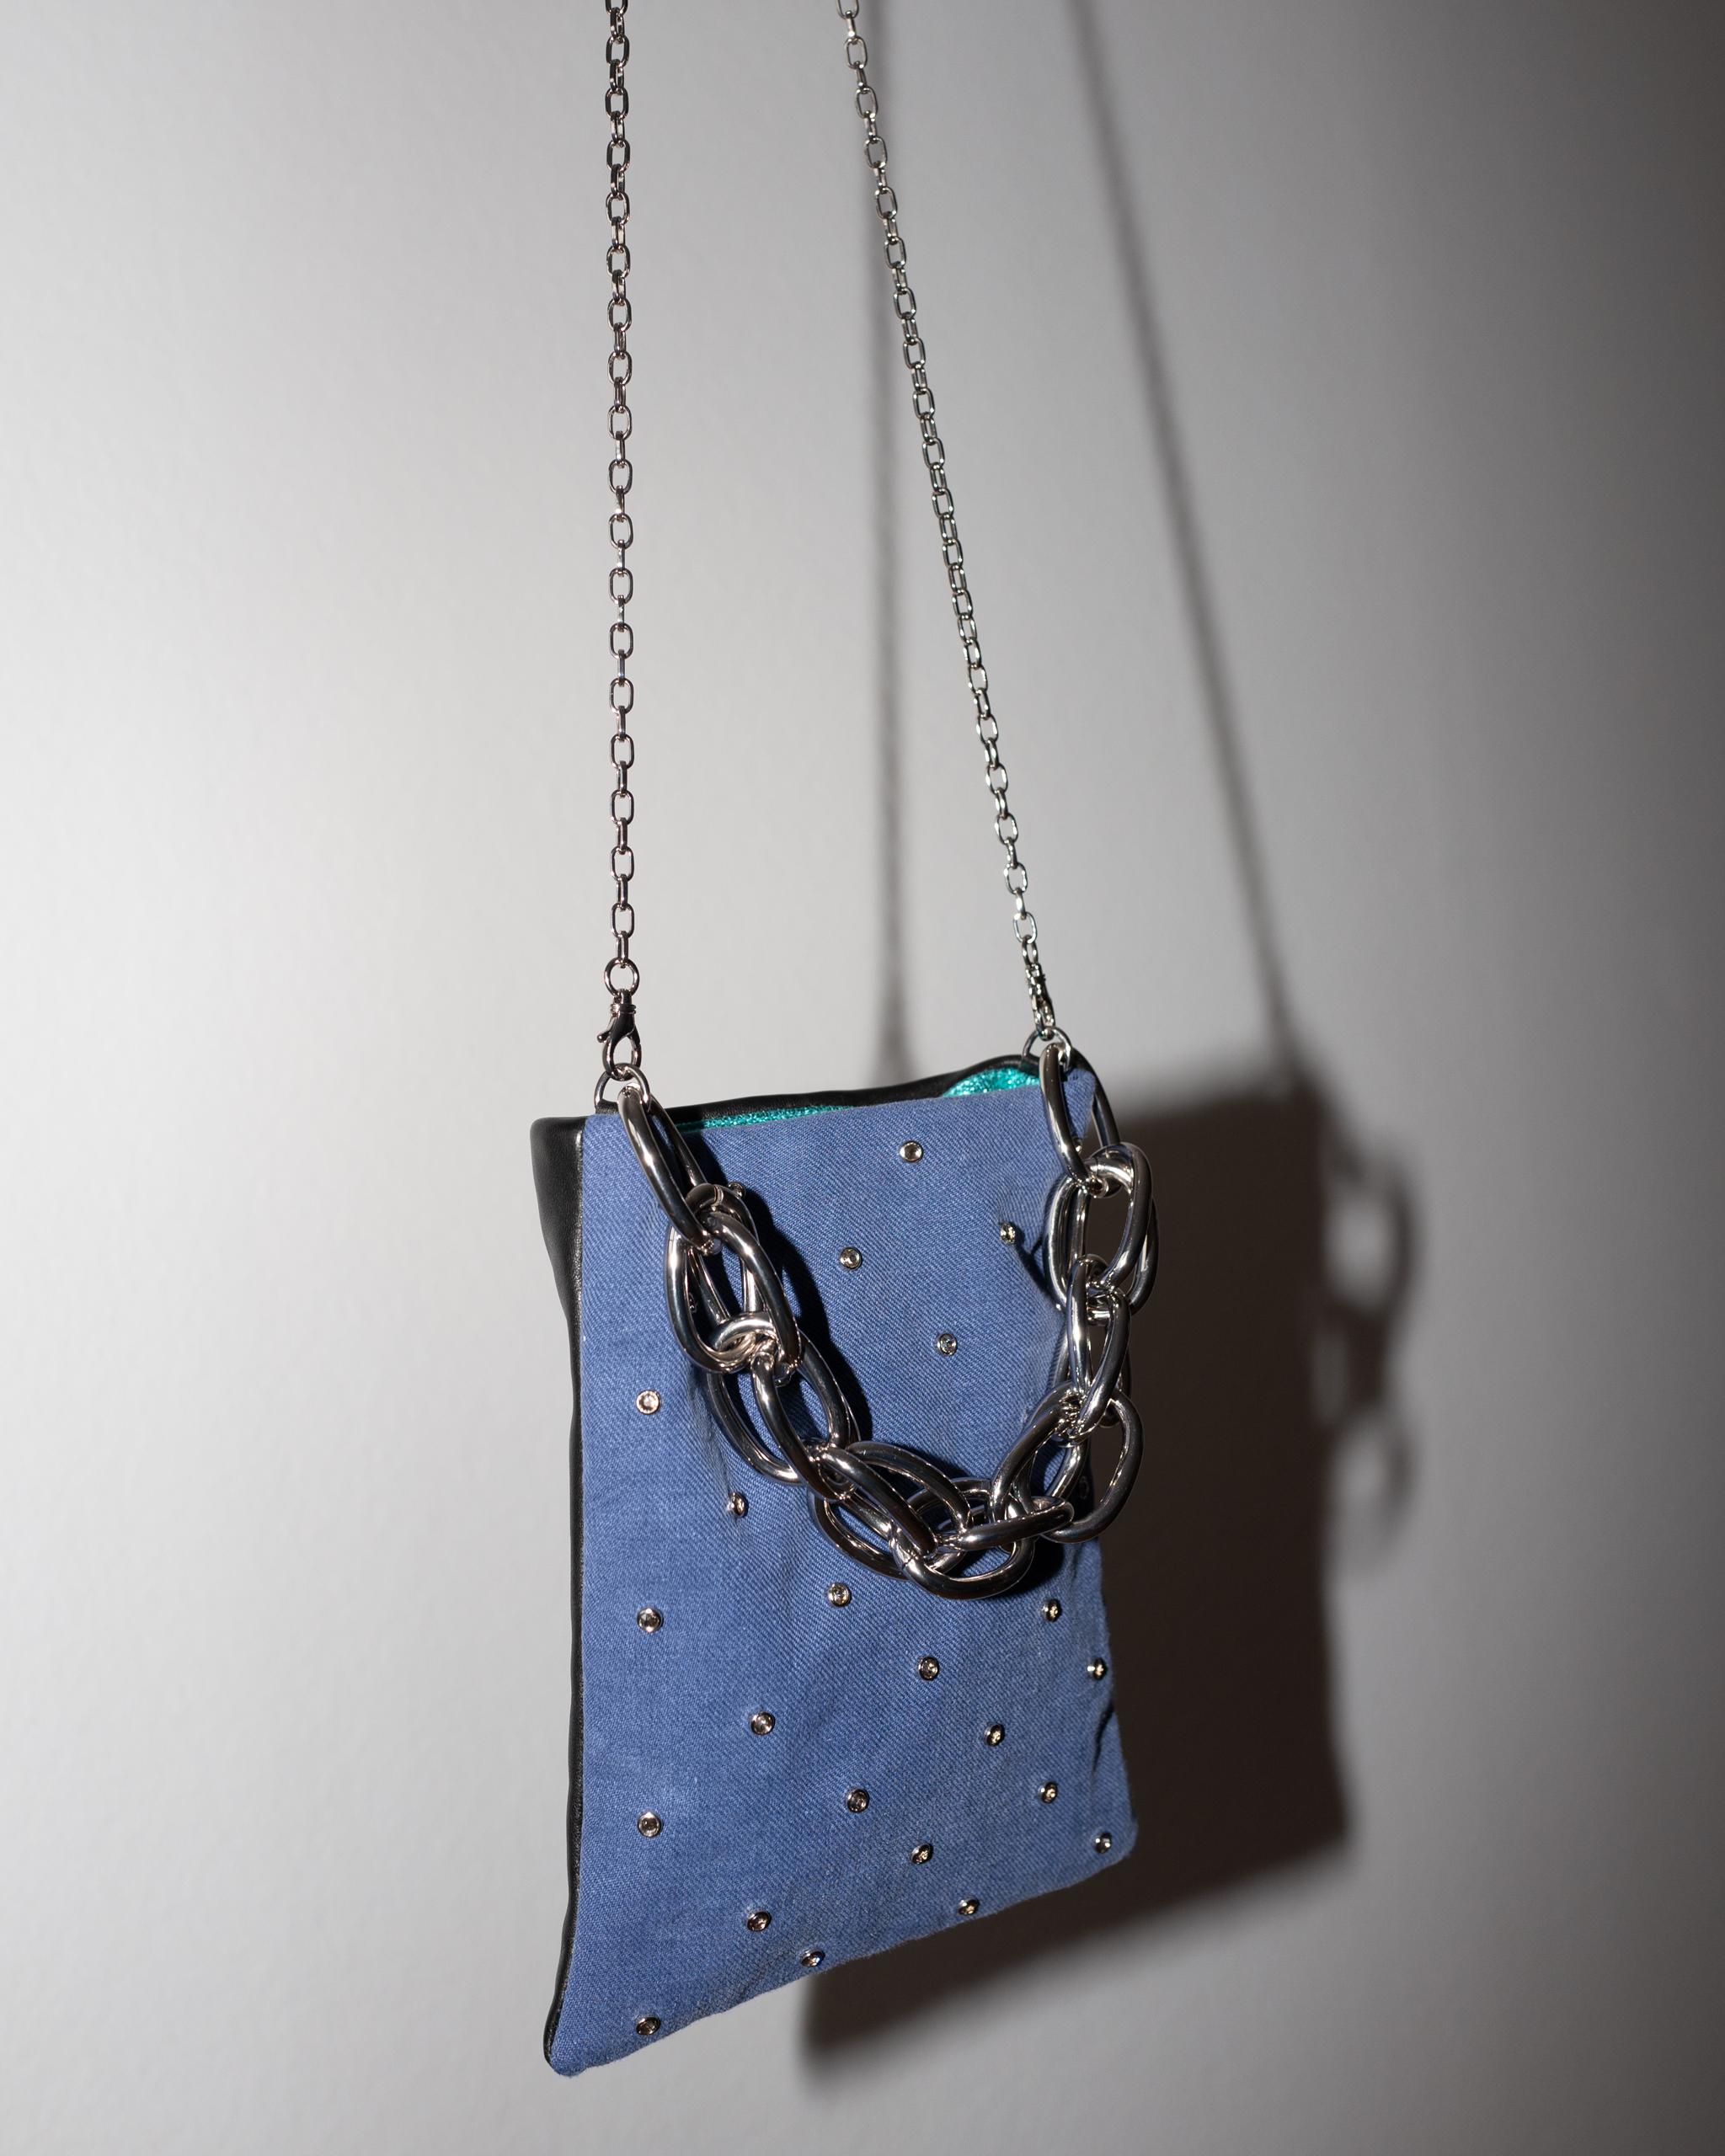 One of a kind Evening Shoulder Bag, Swarovski Crystal Embellished  French Blue Vintage Work Wear on one side and on the other side Italian Black Leather, Inside lining in Turquoise Metallic Leather, Italian Palladium Plated Brass Shoulder Chain